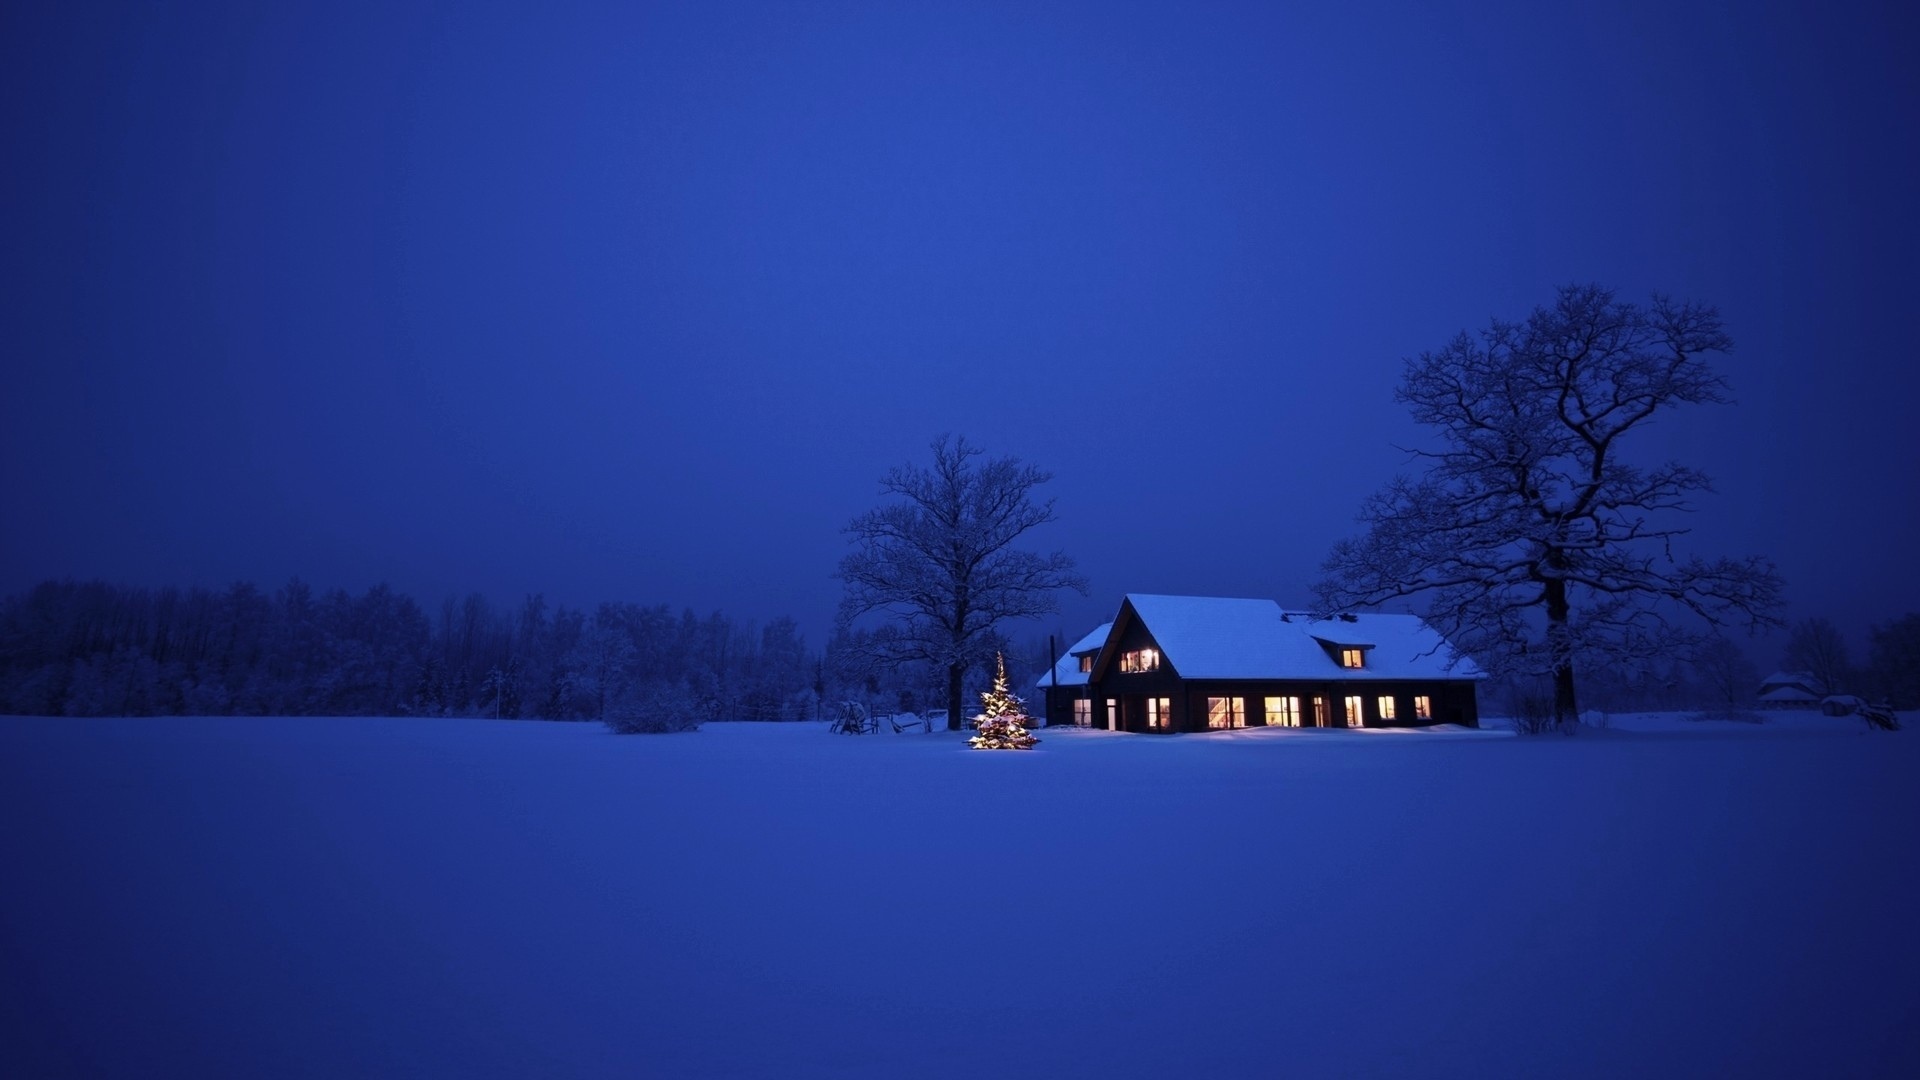 snow, christmas xmas, houses, new year, landscape, holidays, winter, blue